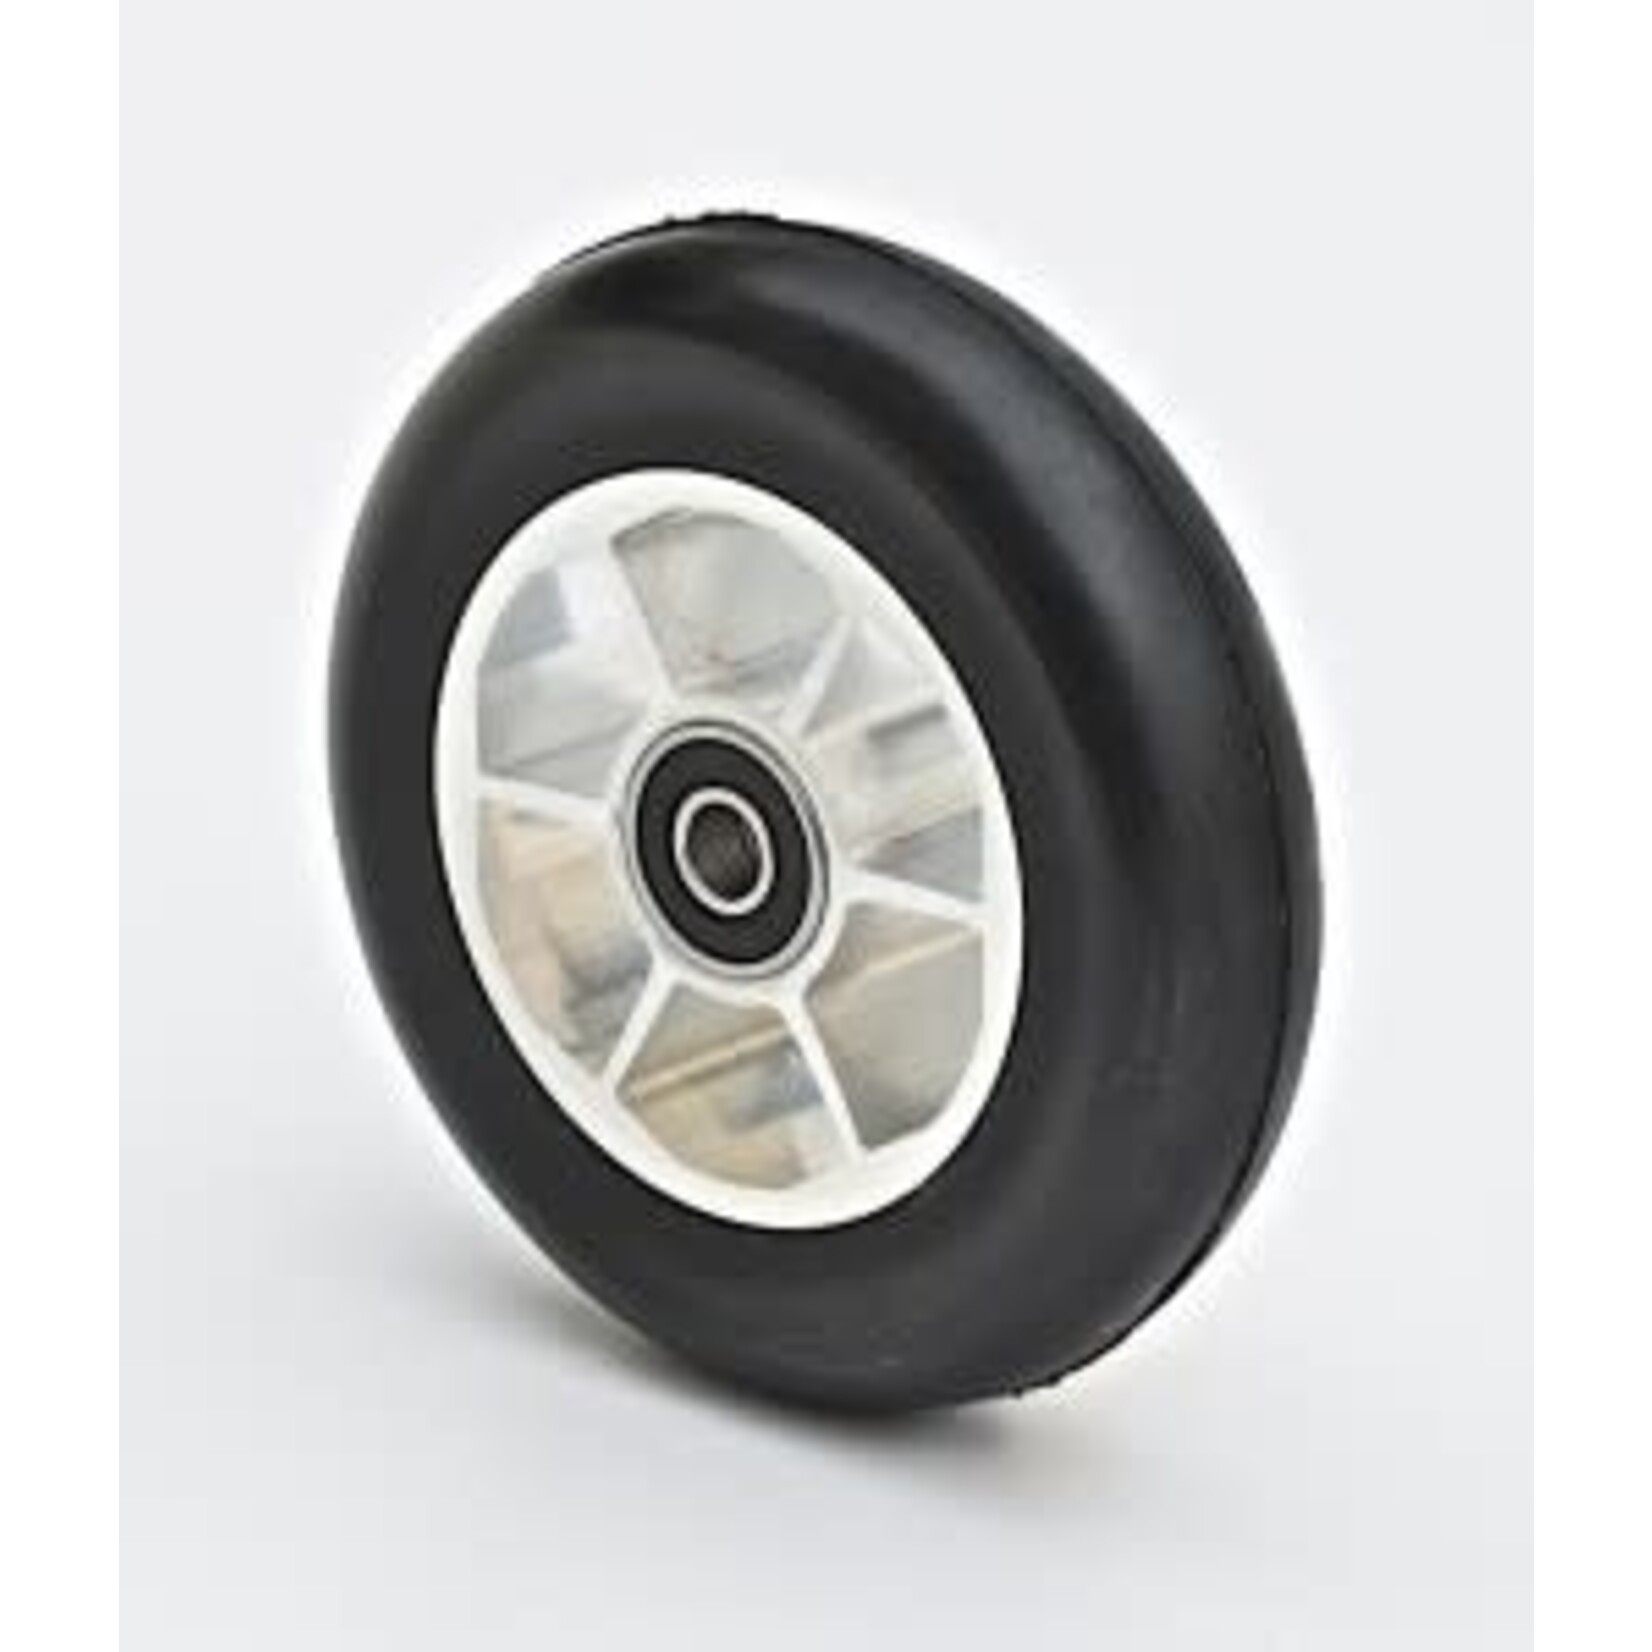 V2 98x24mm Fast Wheel (roue 98 rapide)